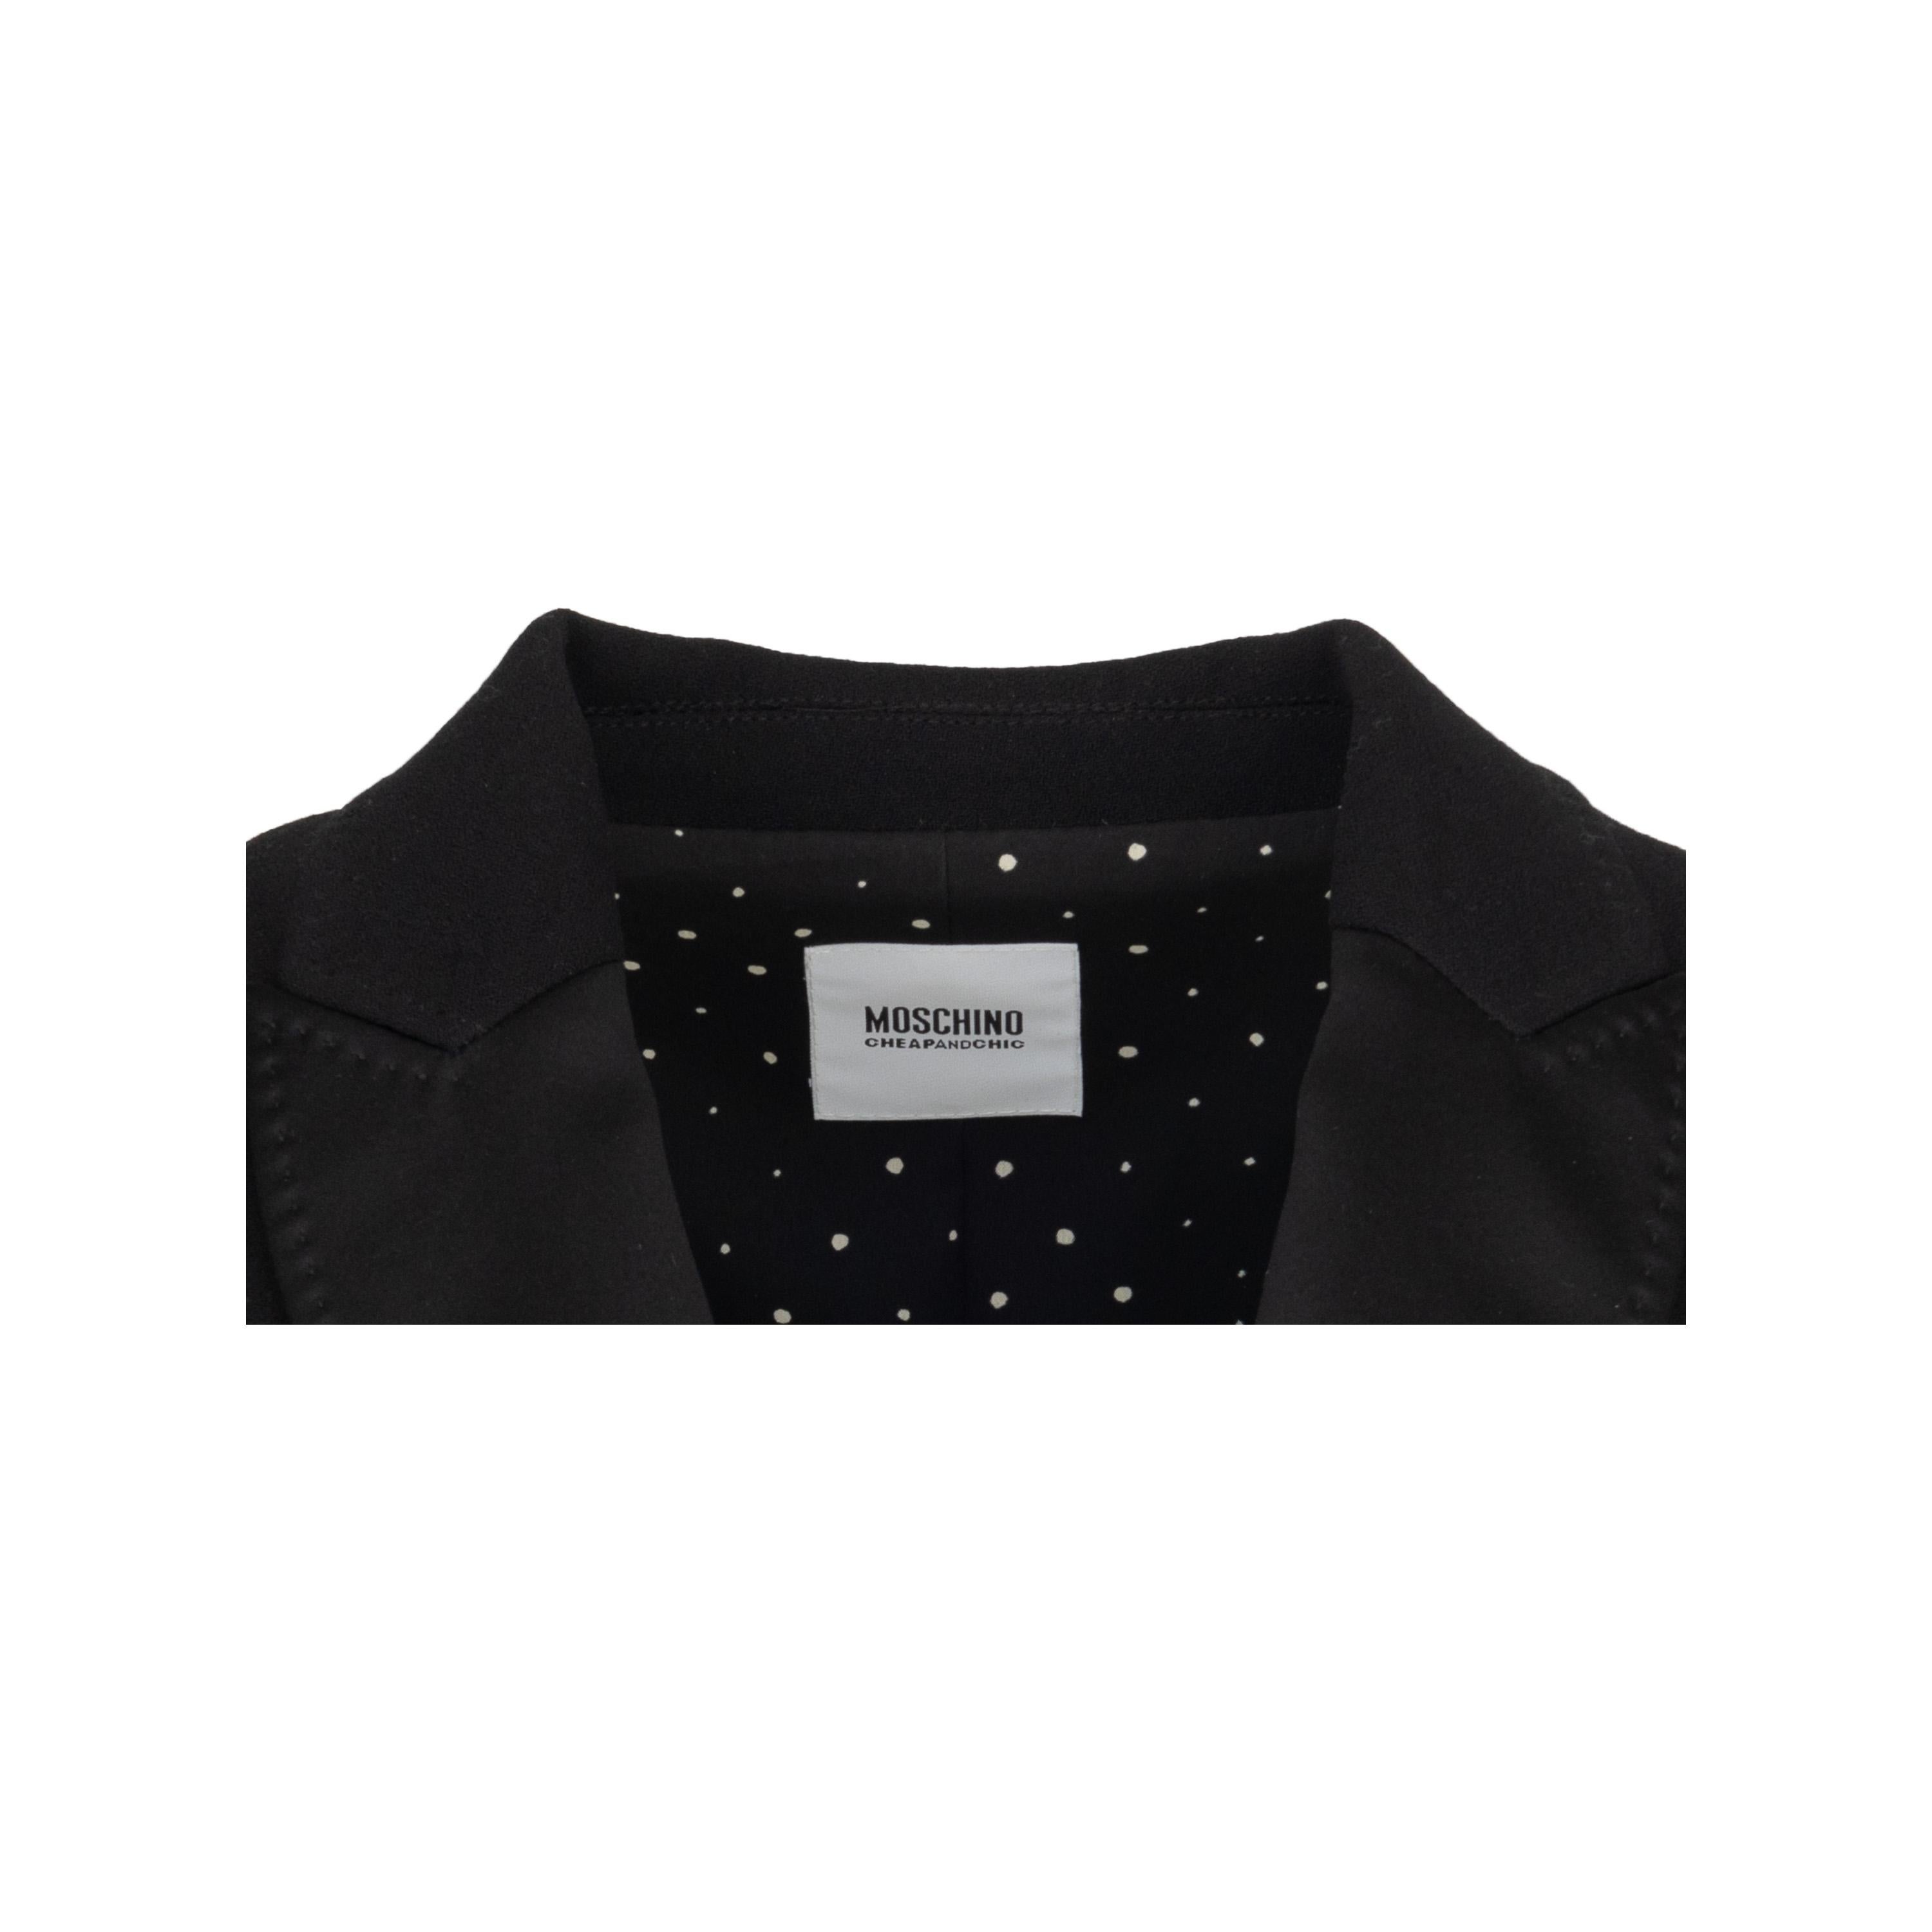 Moschino Cheap and Chic Cropped Tailcoat - '00s In Excellent Condition For Sale In Milano, IT